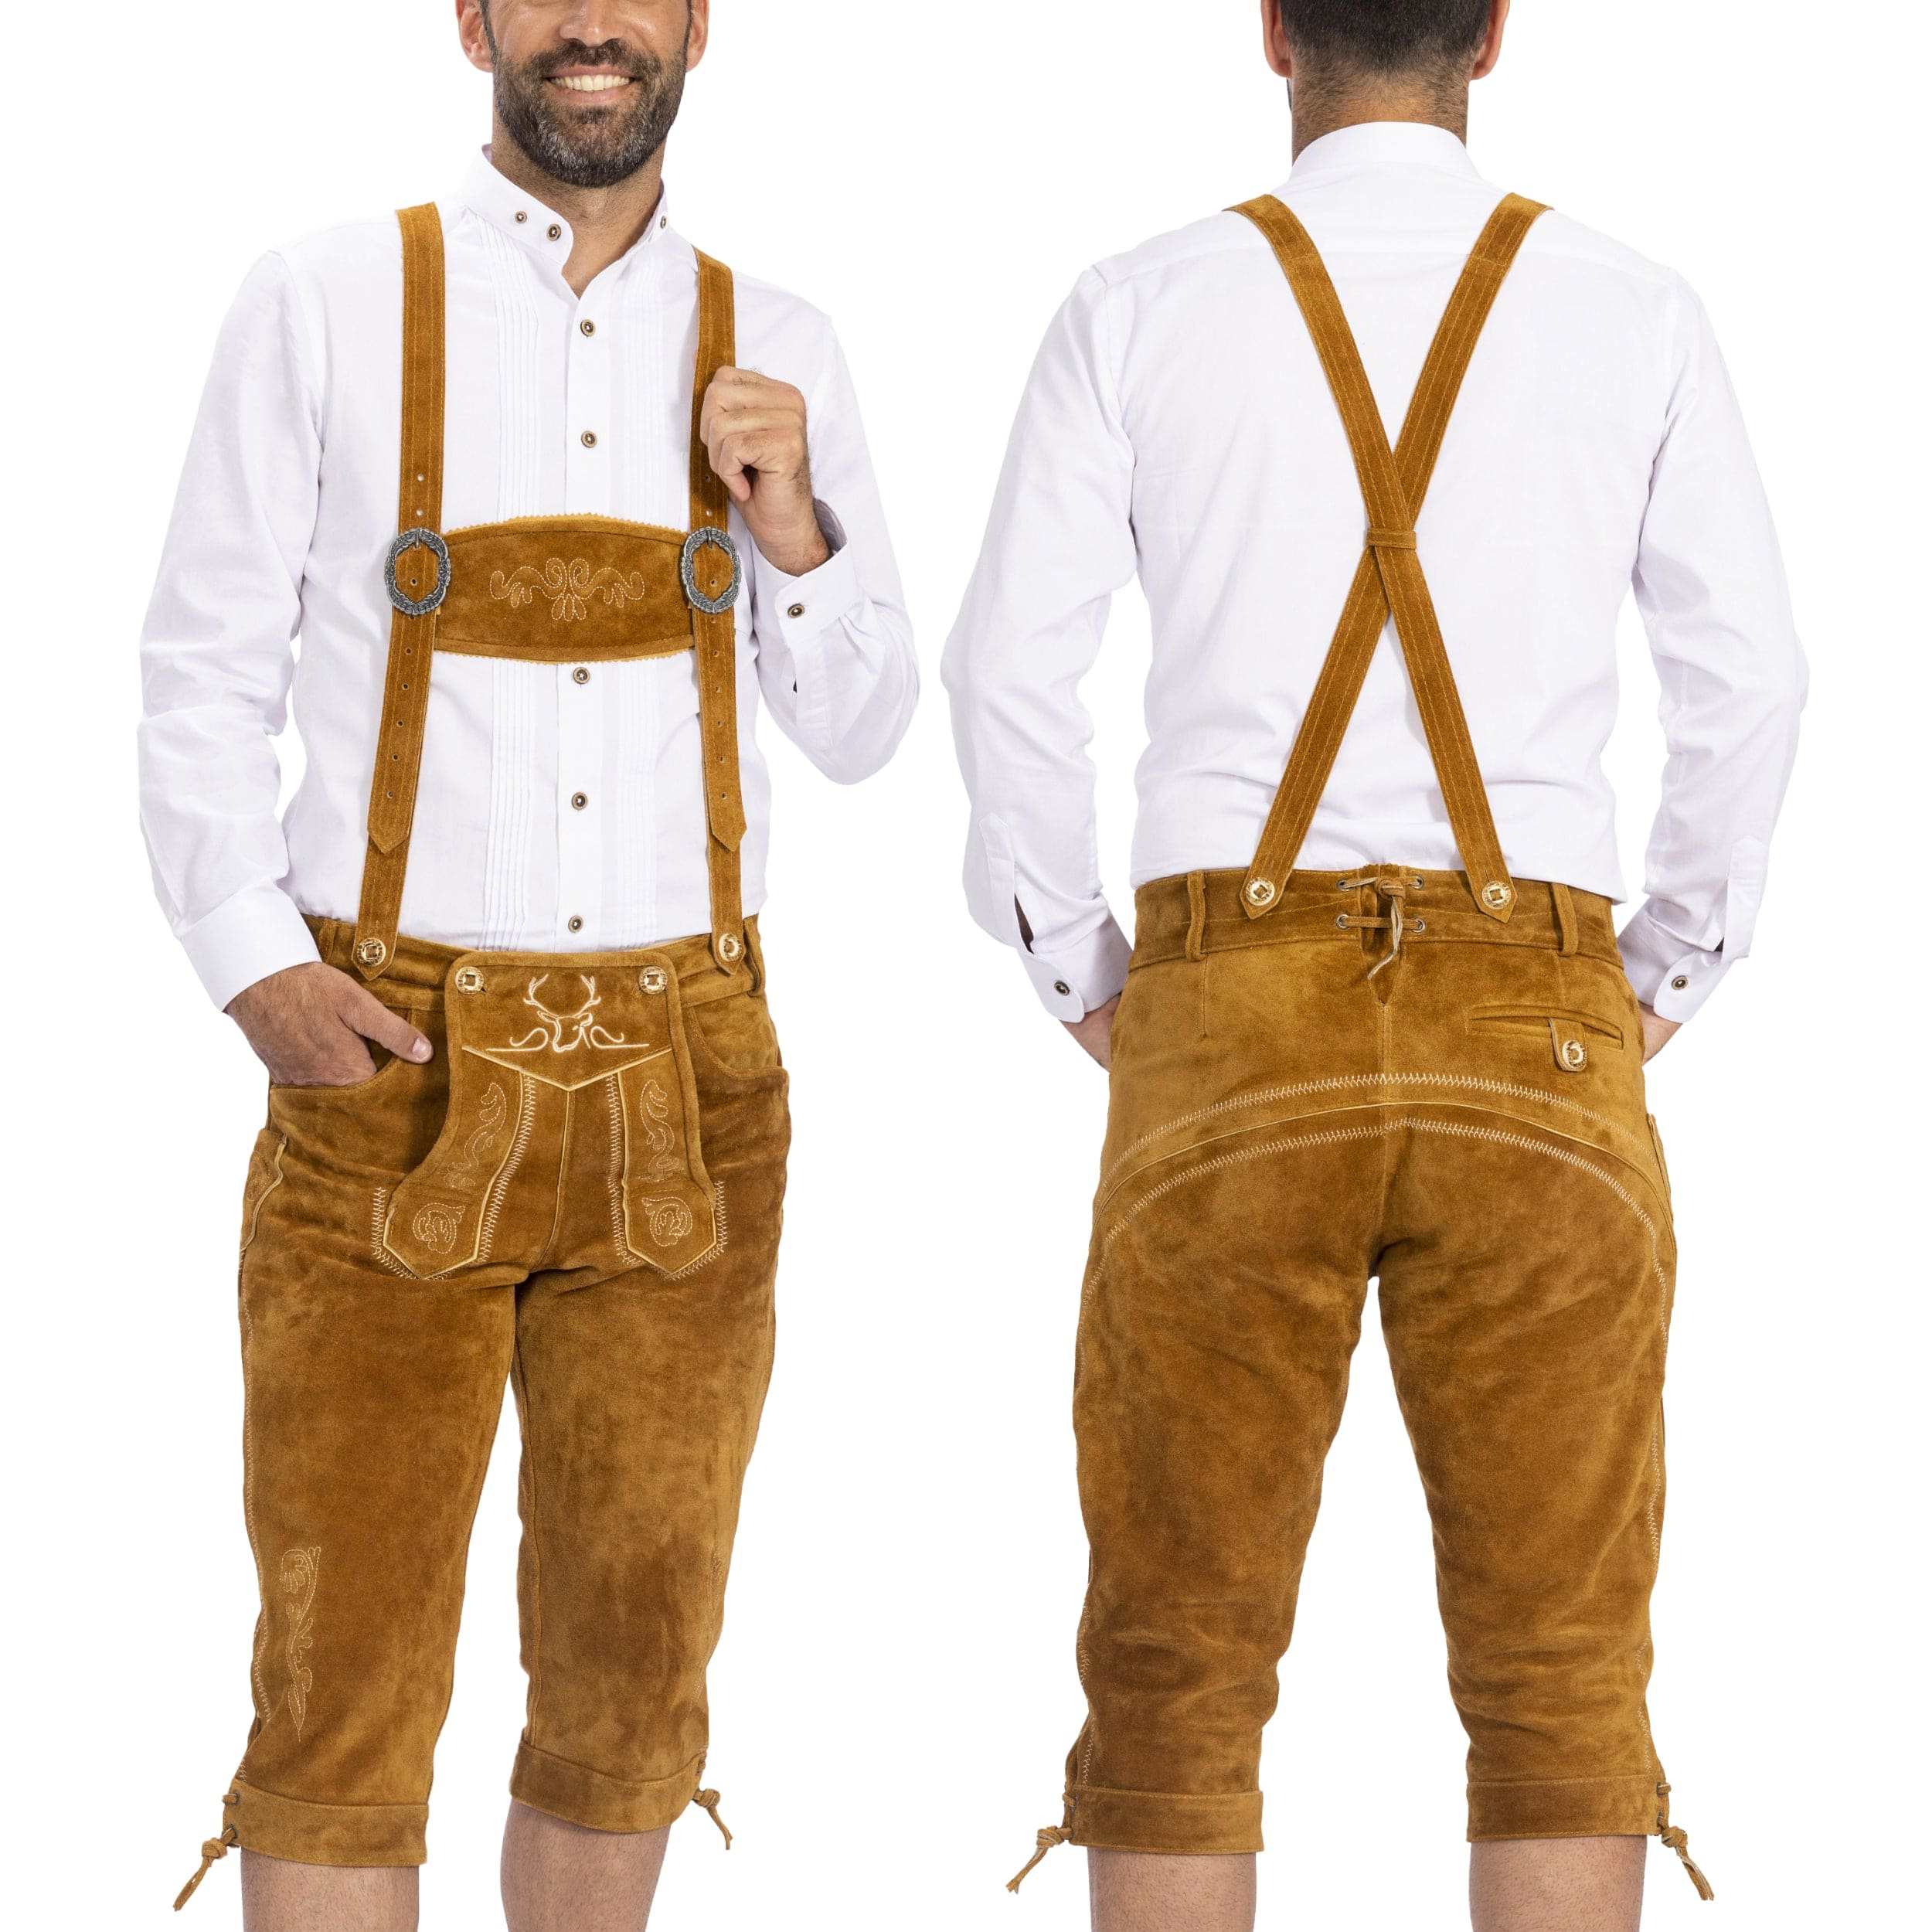 Let's Talk Trachten: Traditional German Clothing